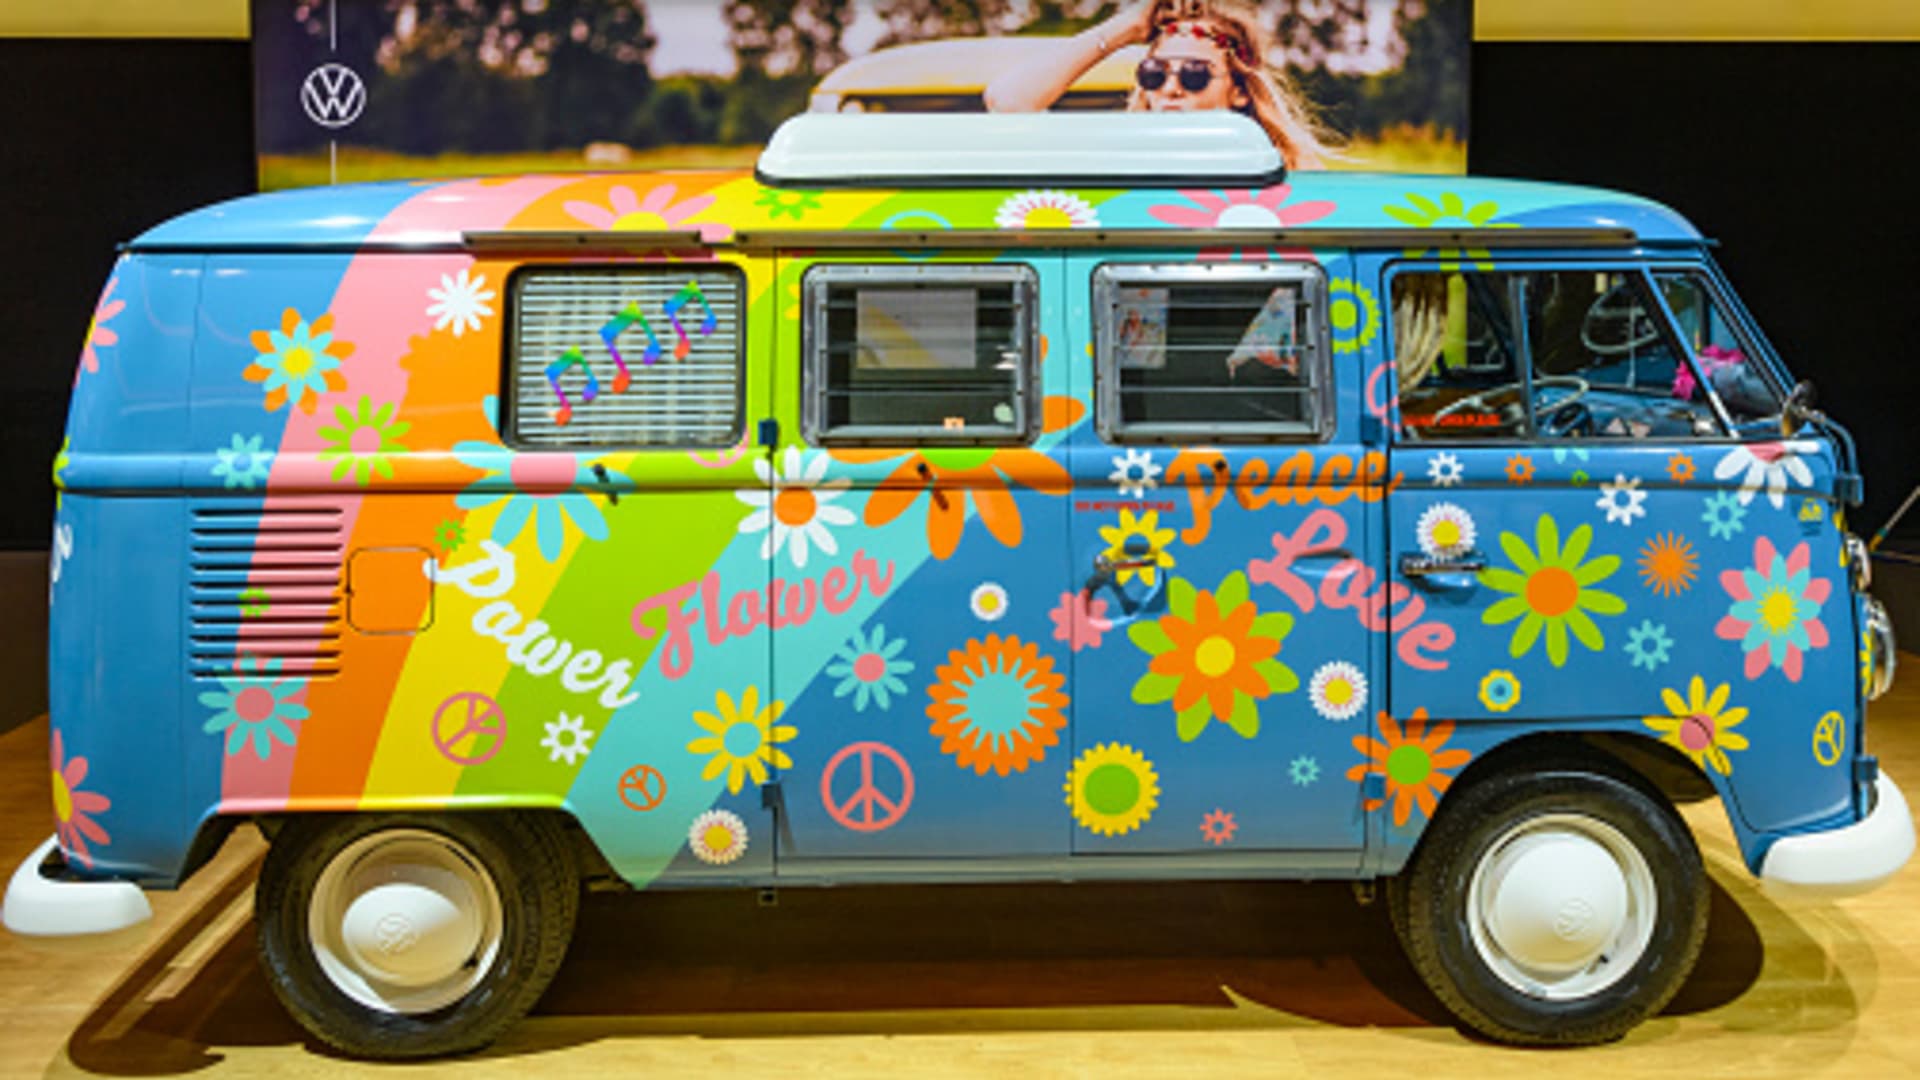 After the ‘hippie’ bus and Beetle, VW makes eyes at America once again